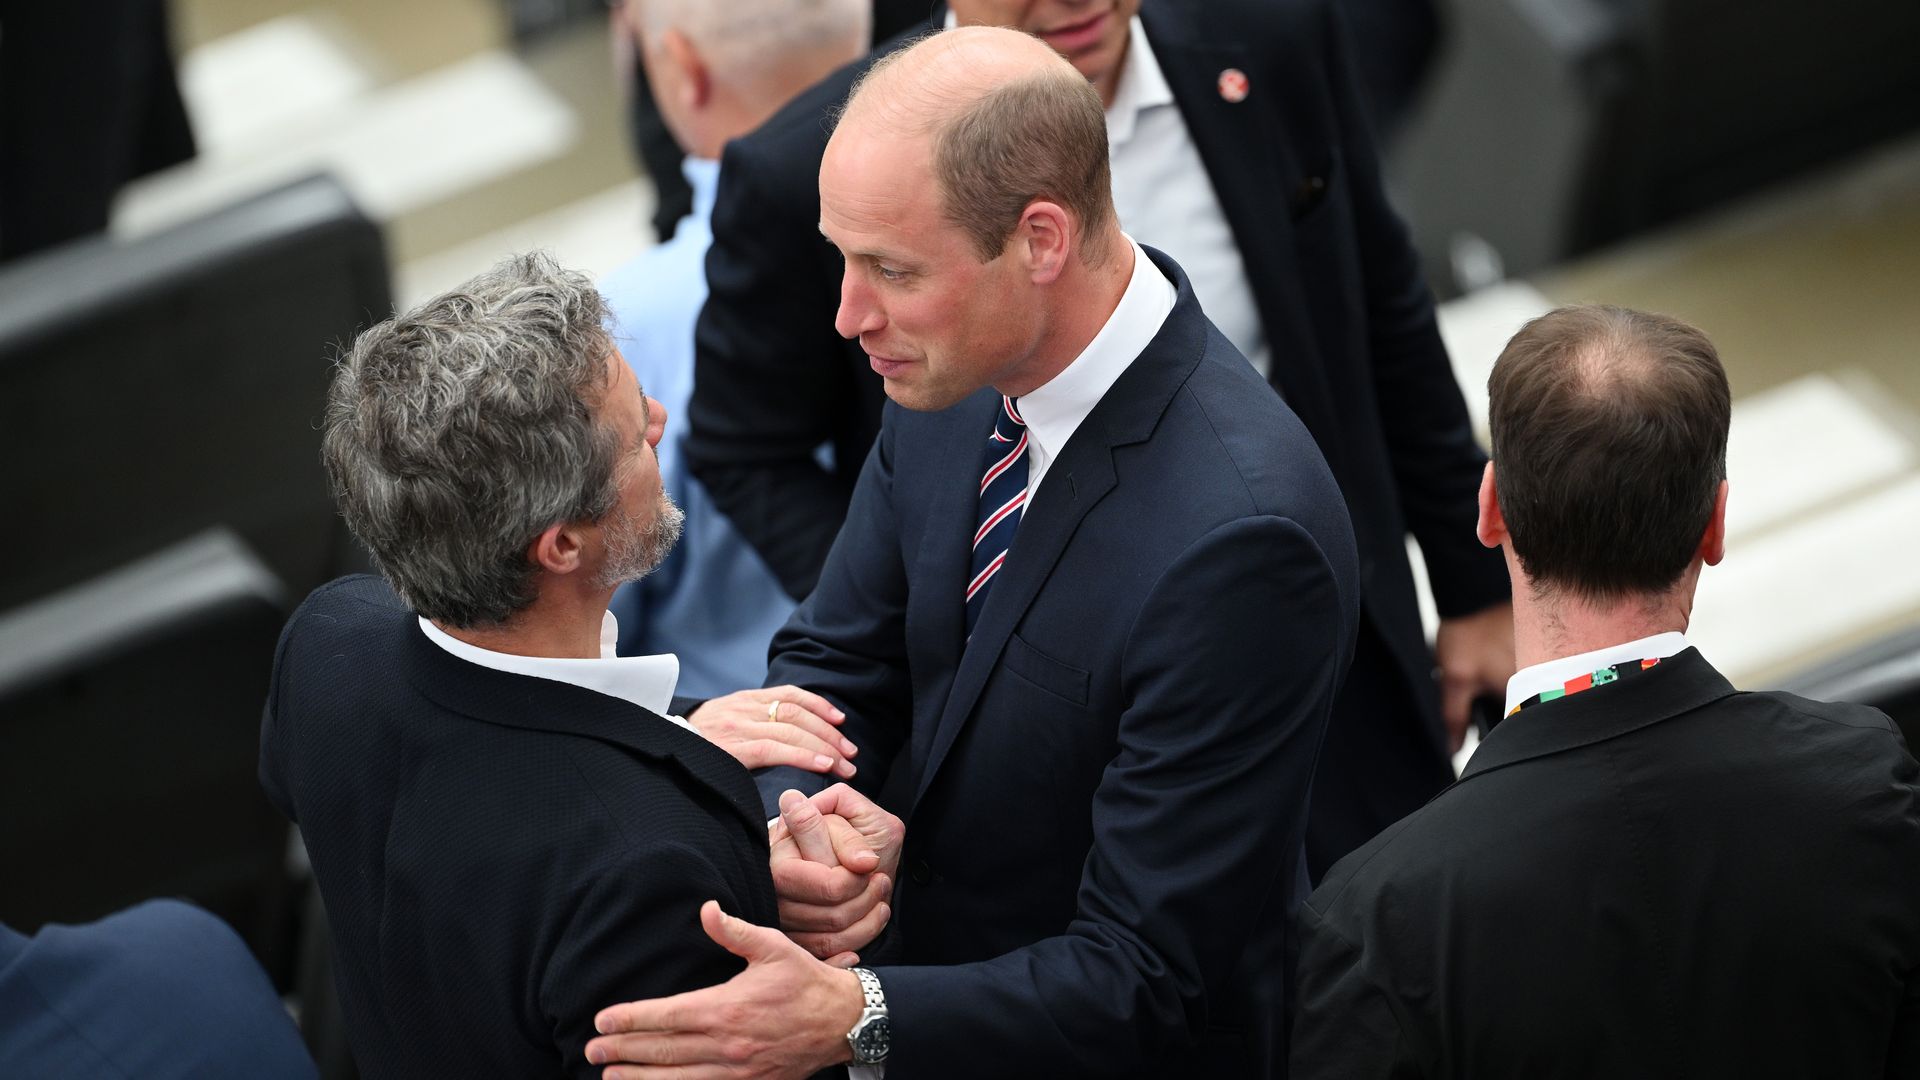 Prince William and King Frederik putting their arms around each other